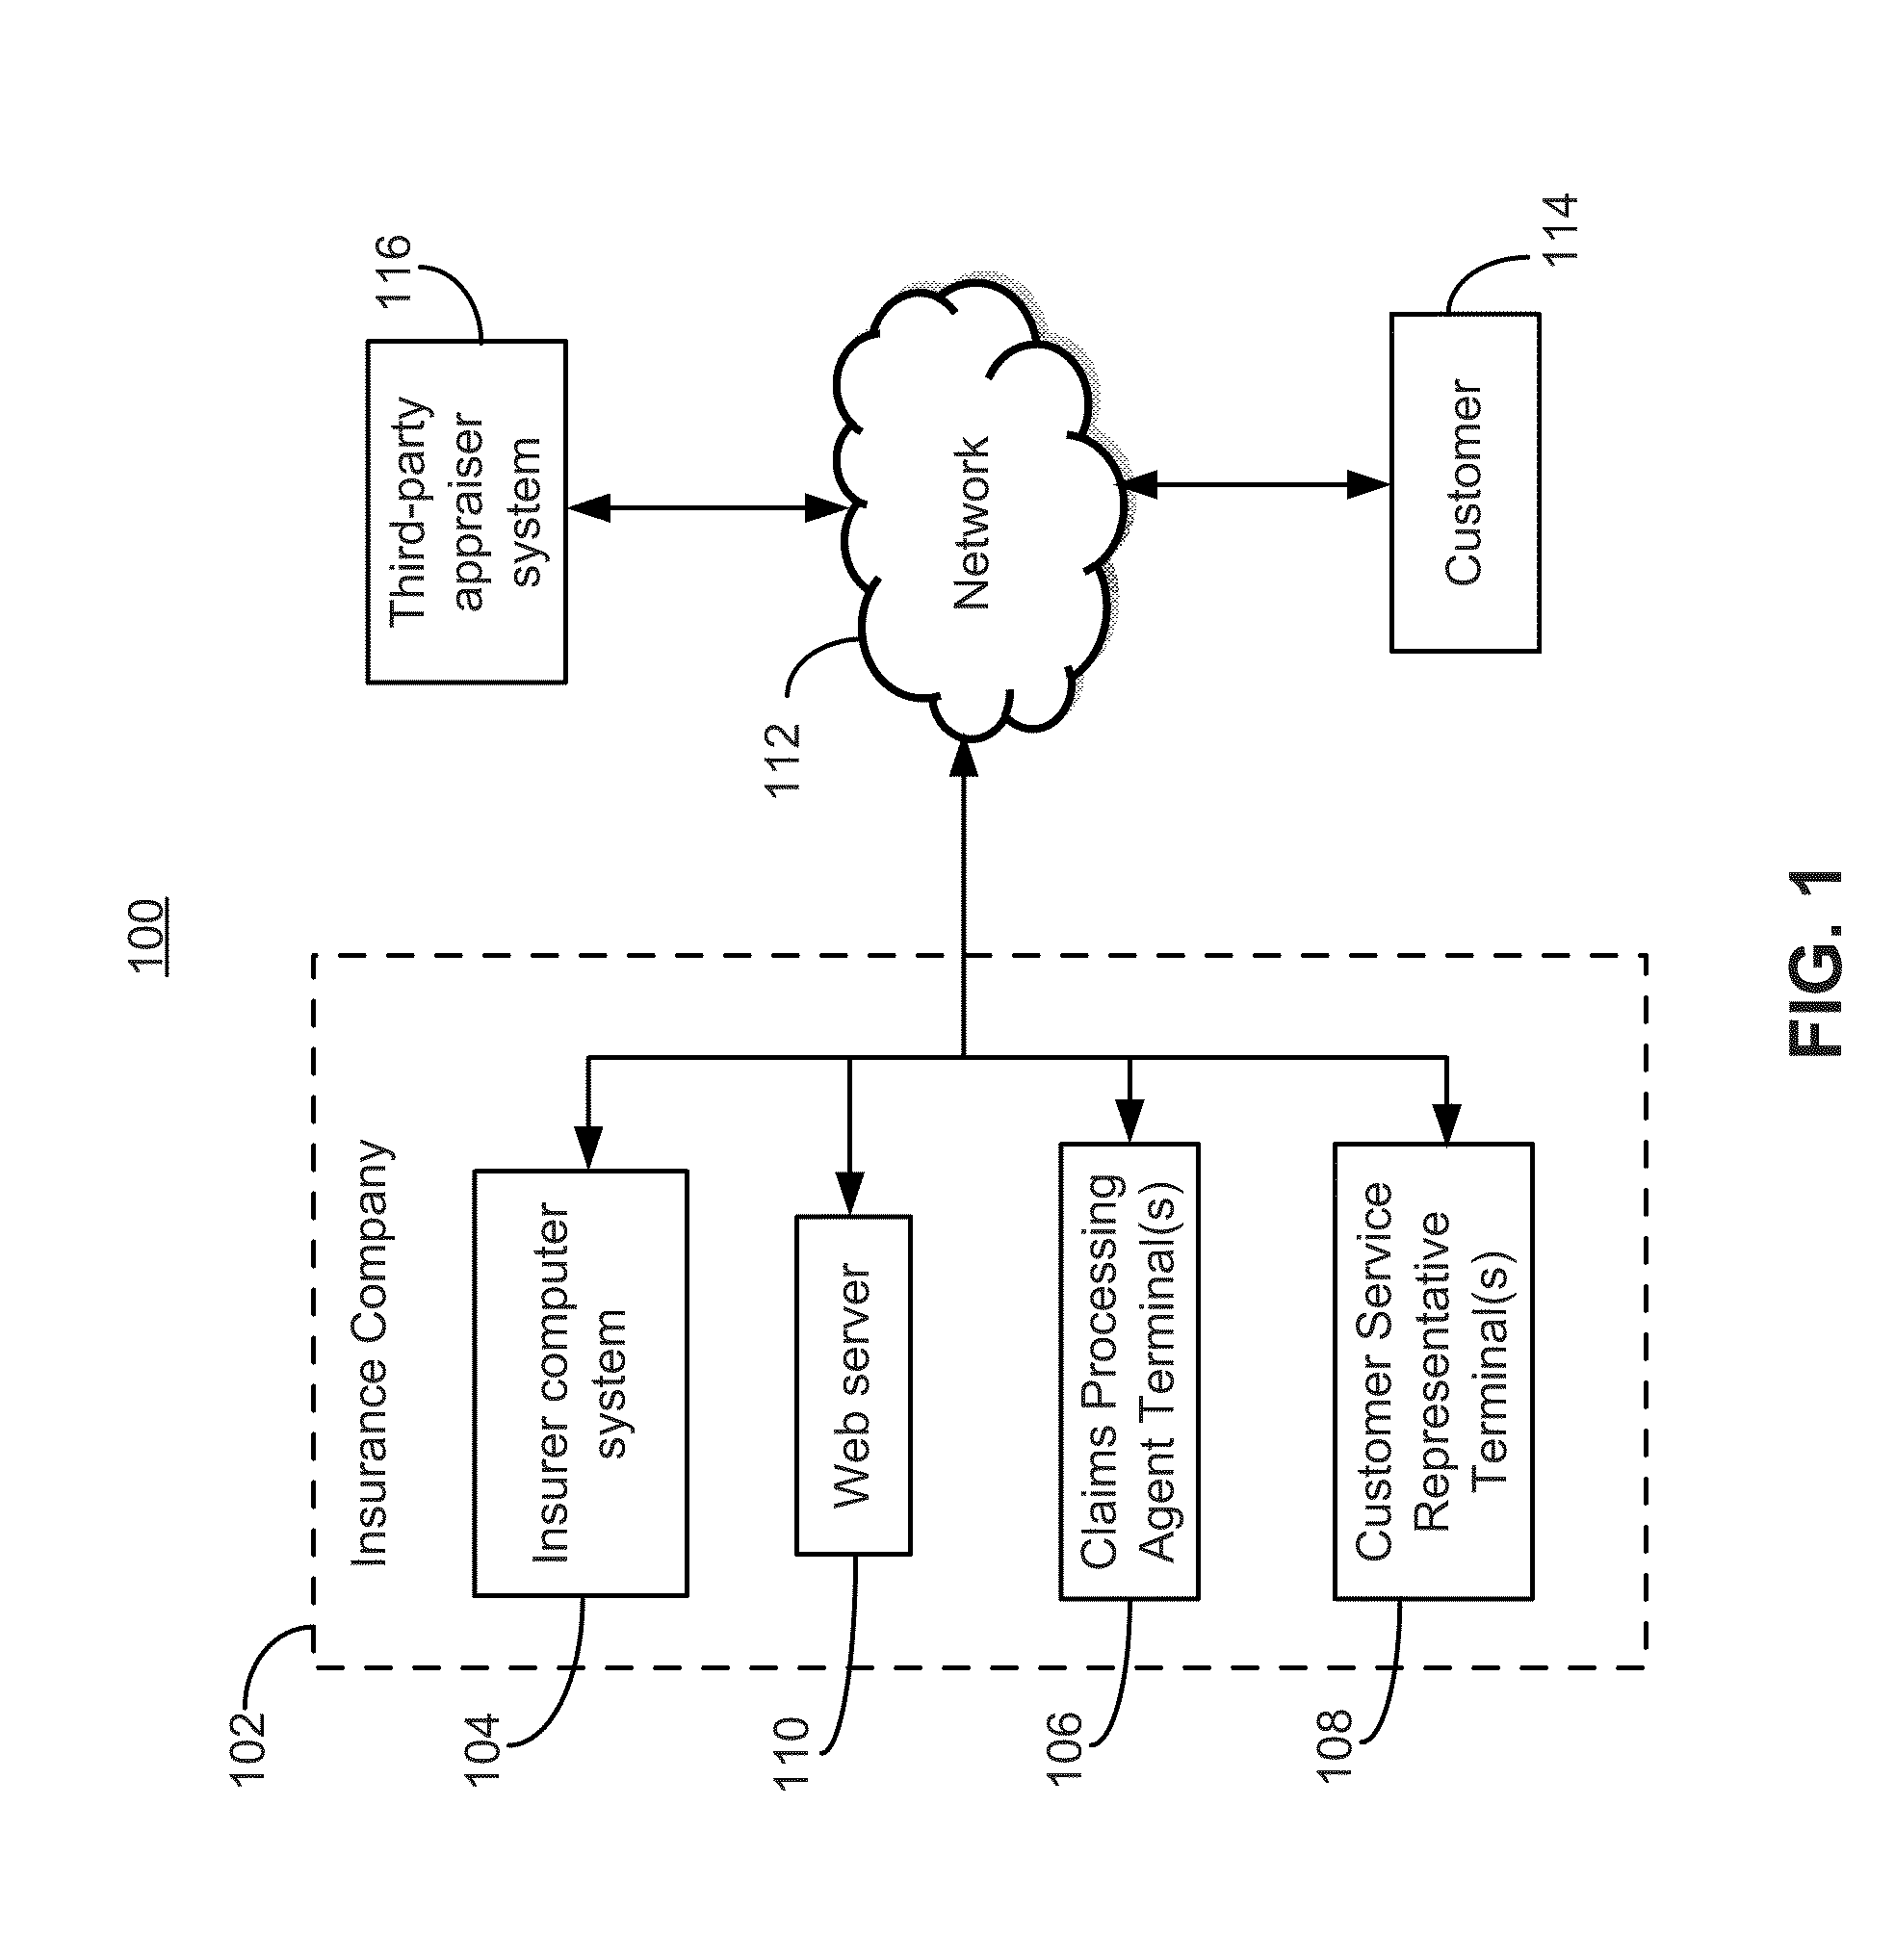 Systems and methods for collecting insurance-related data